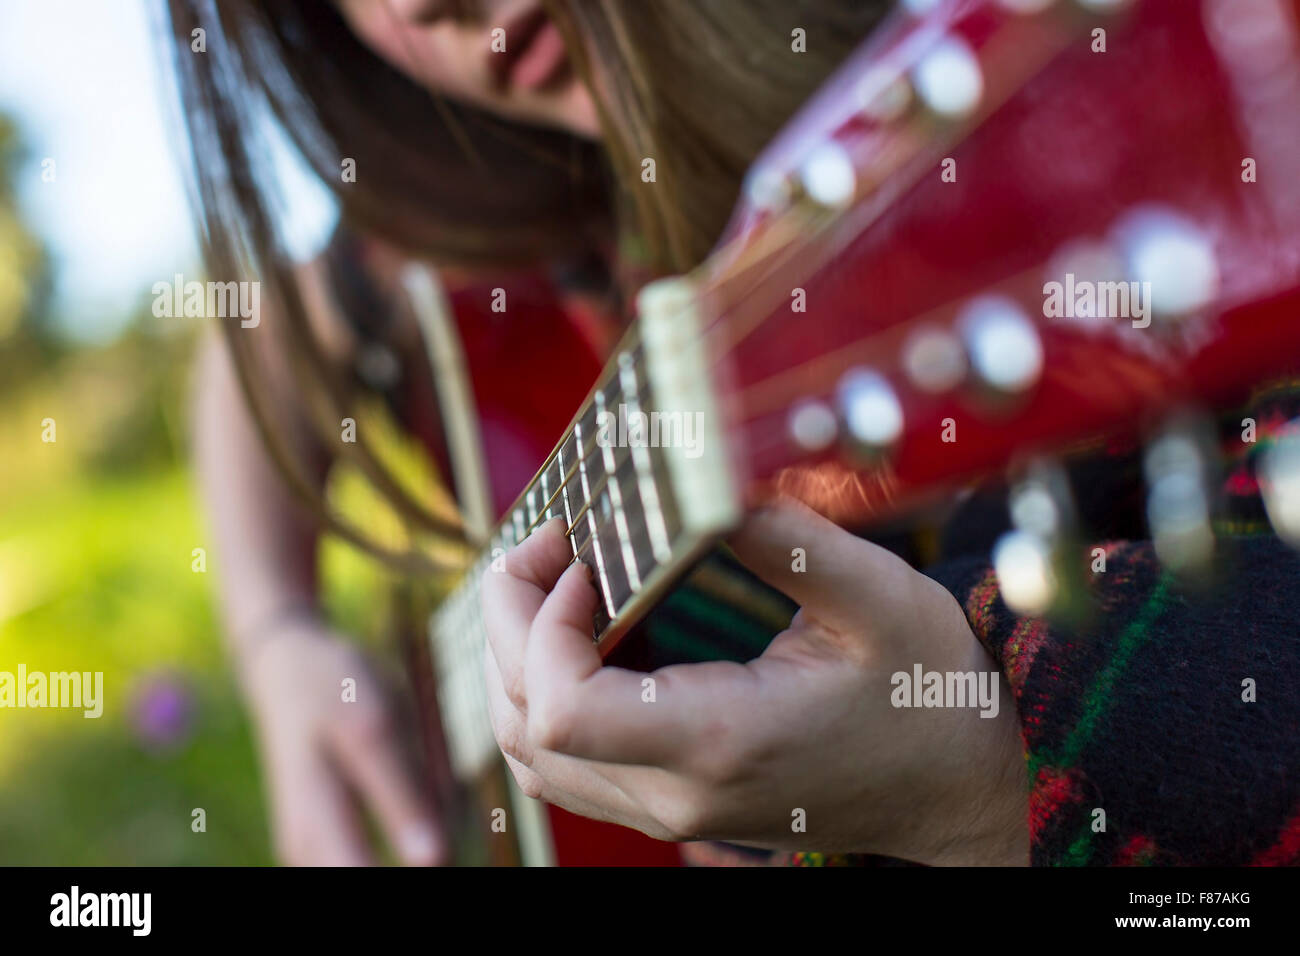 Hands of a young girl on the frets of acoustic guitar. Stock Photo